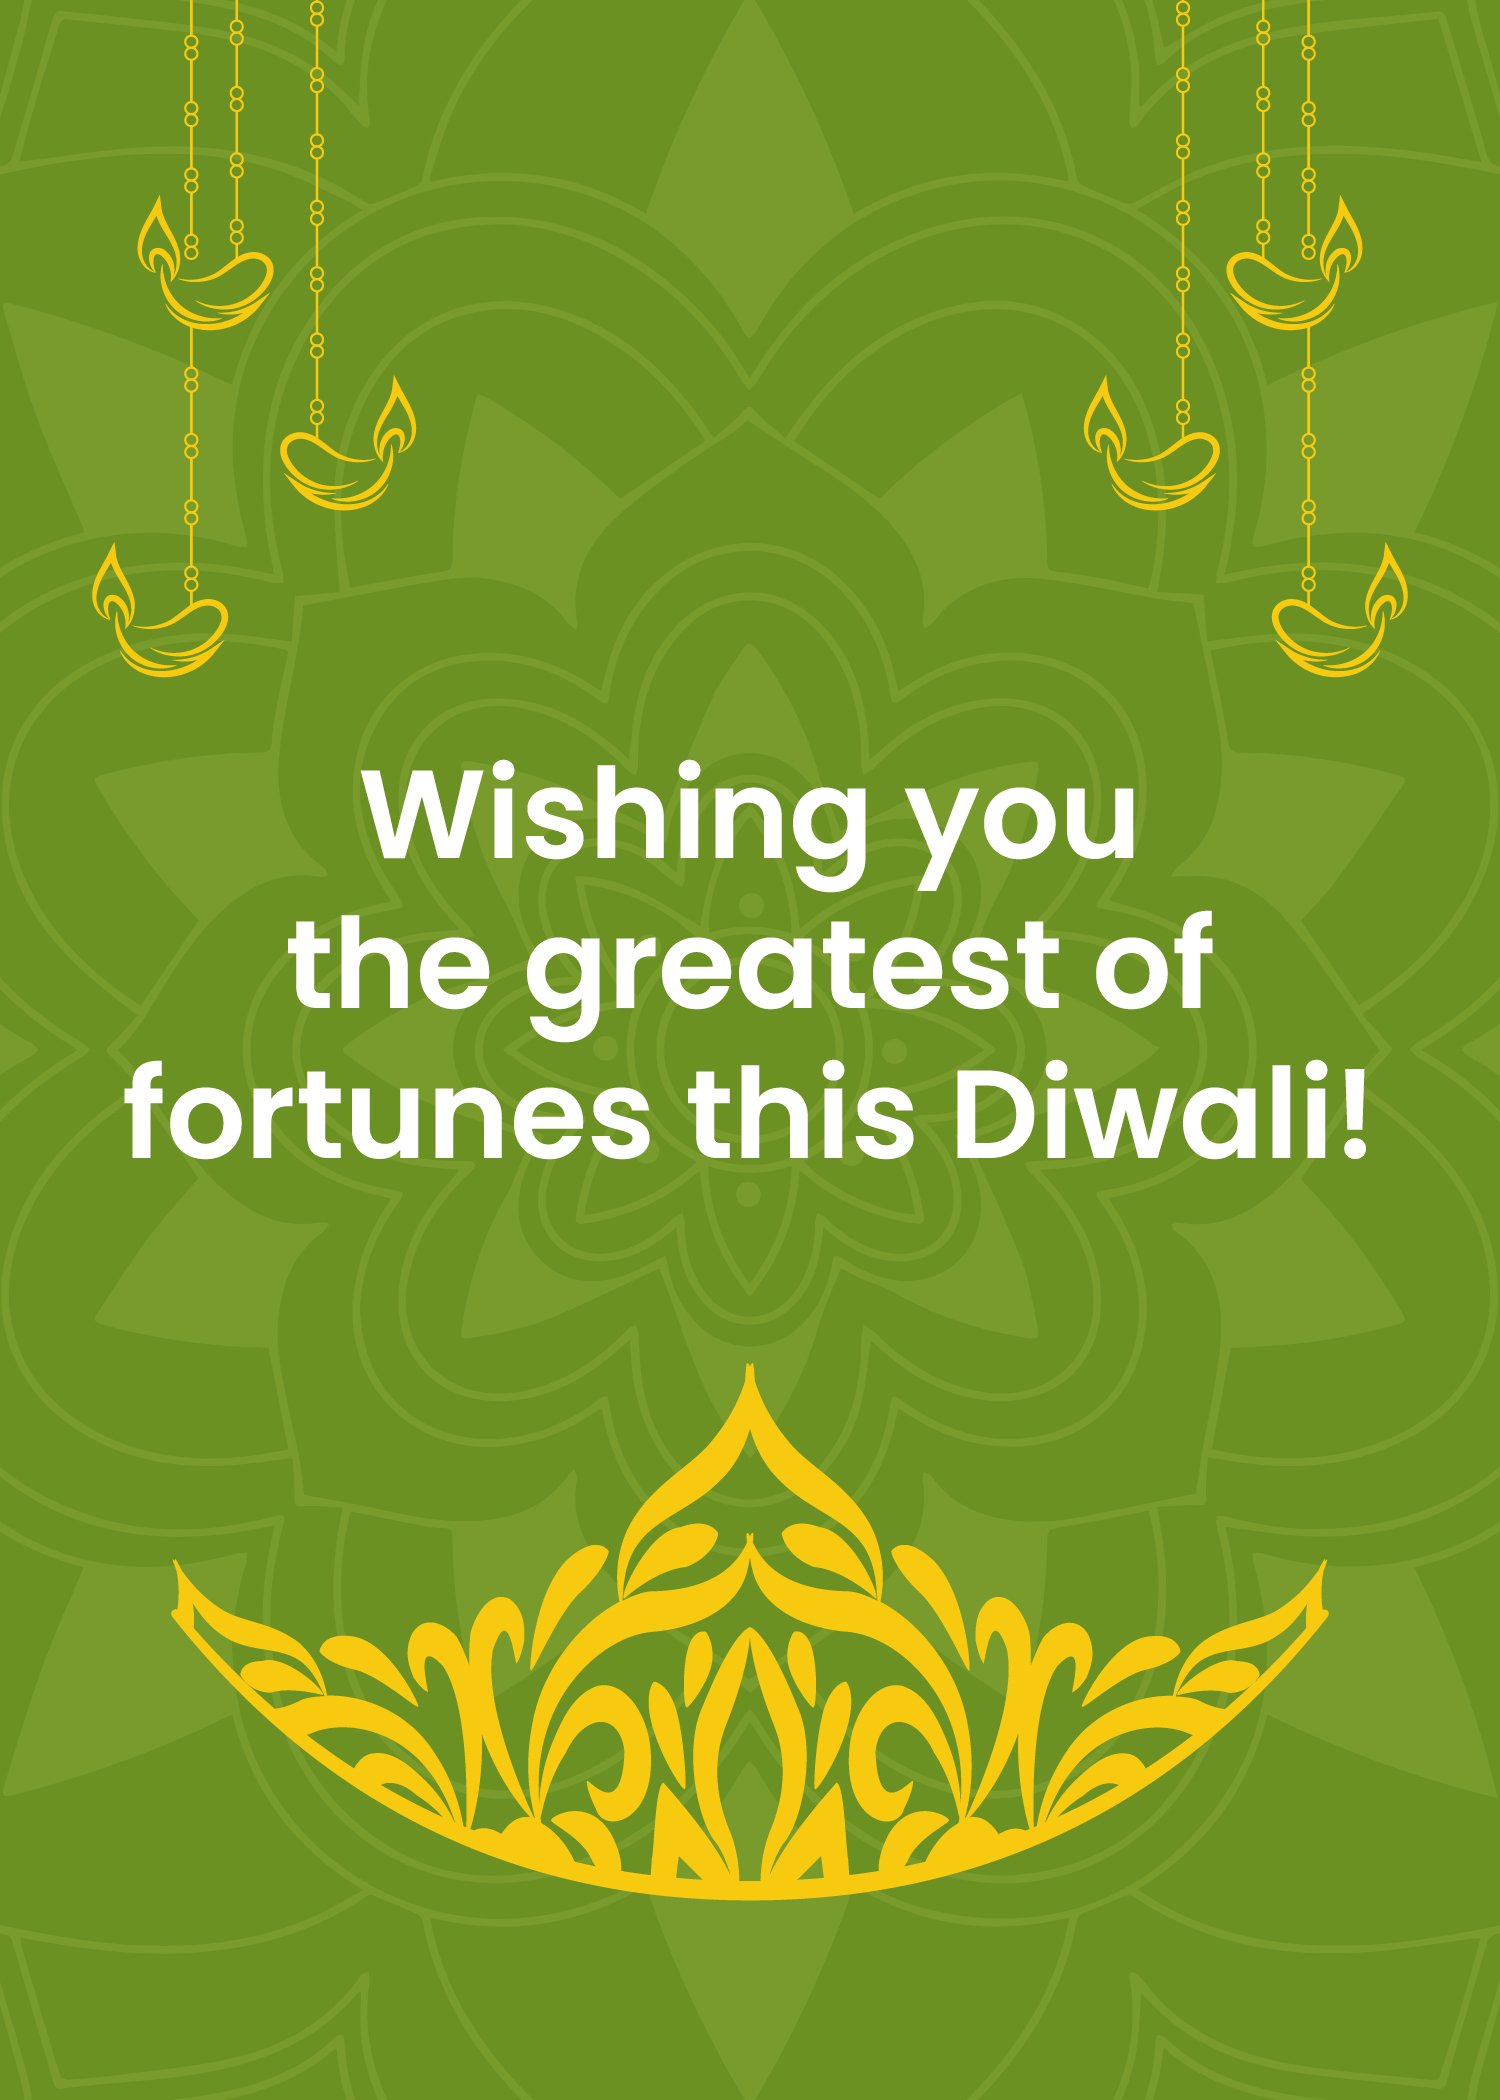 Free Diwali Day Wishes in Word, Google Docs, Illustrator, PSD, Apple Pages, Publisher, EPS, SVG, JPG, PNG